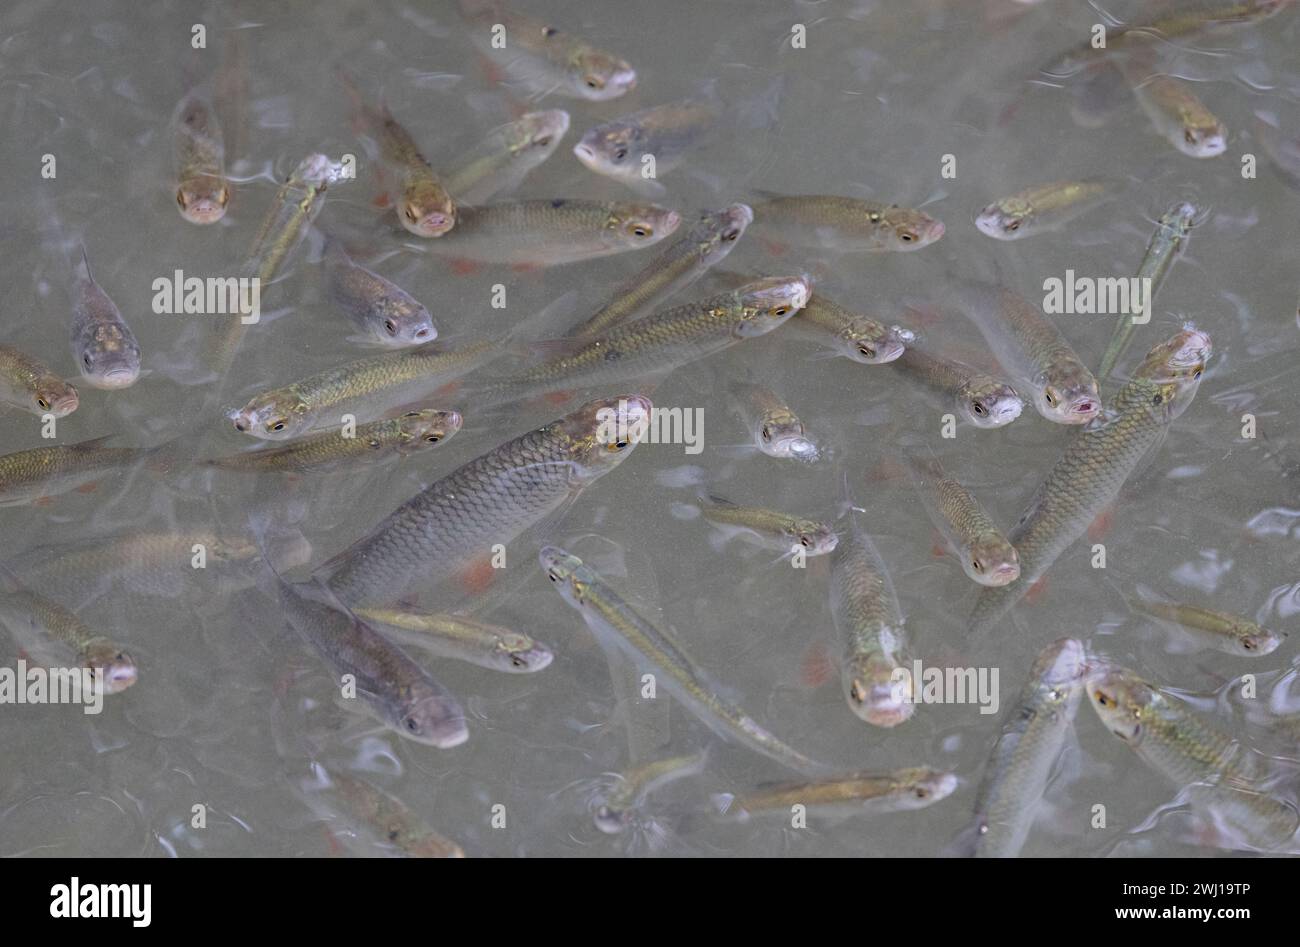 A close-up shot of a dense school of bream fish in the water Stock Photo